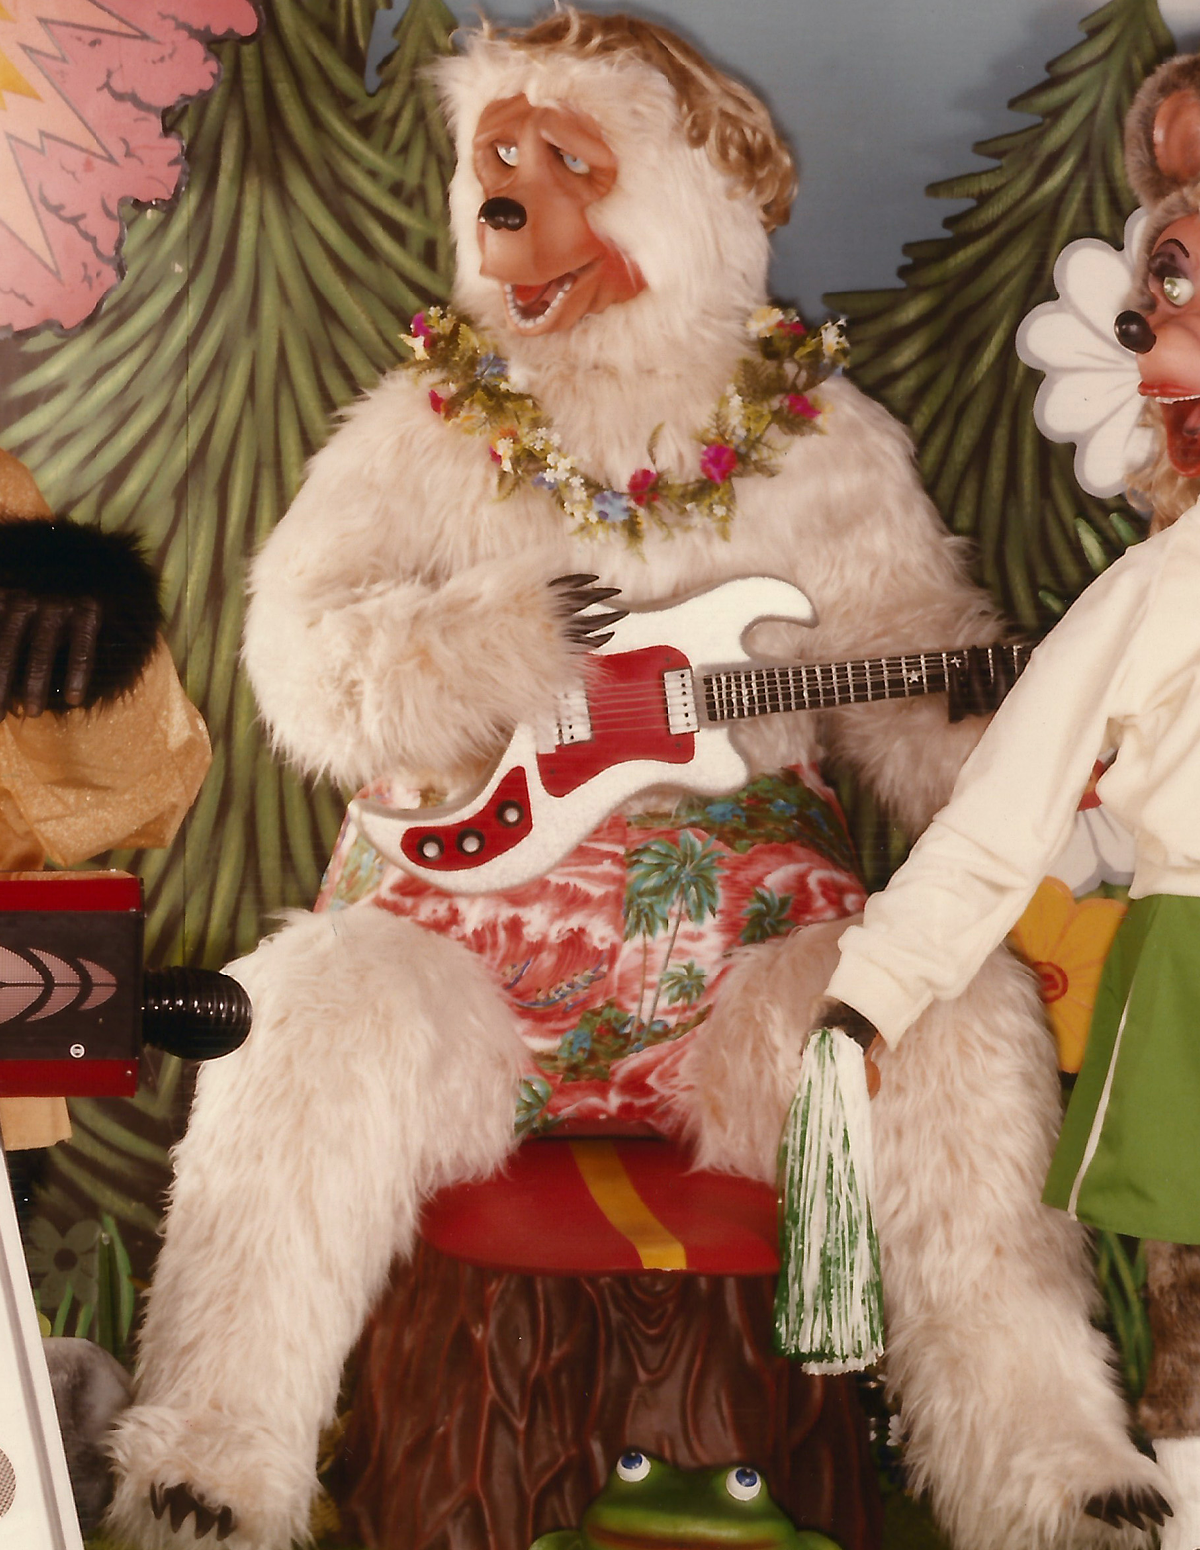 The Beach Bear animatronic. He is a polar bear in swim shorts, a lei, and a blonde wig, and he is holding a guitar.